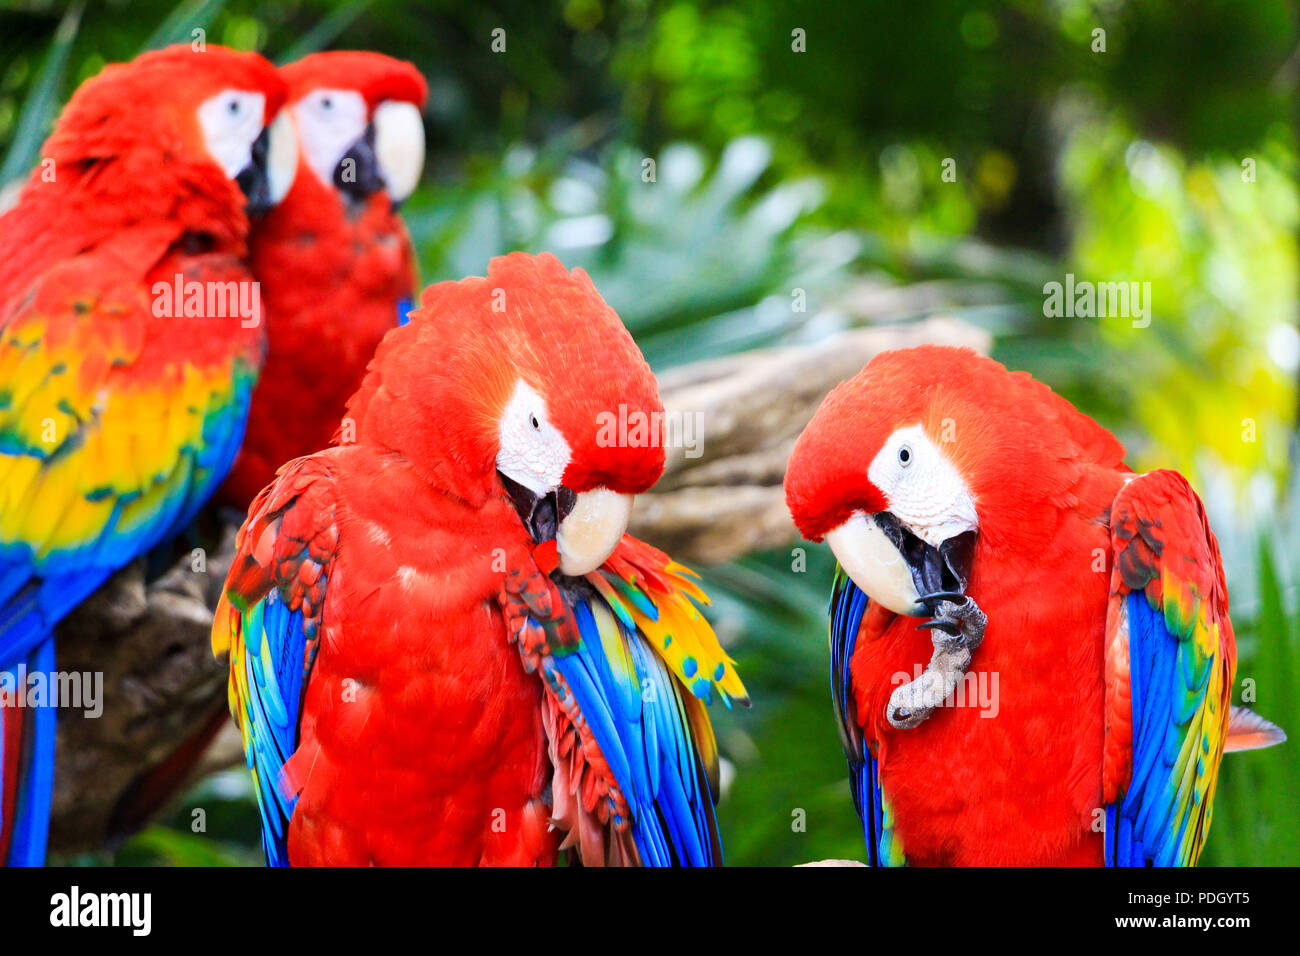 Colorful Parrots biting and scratching their legs Stock Photo